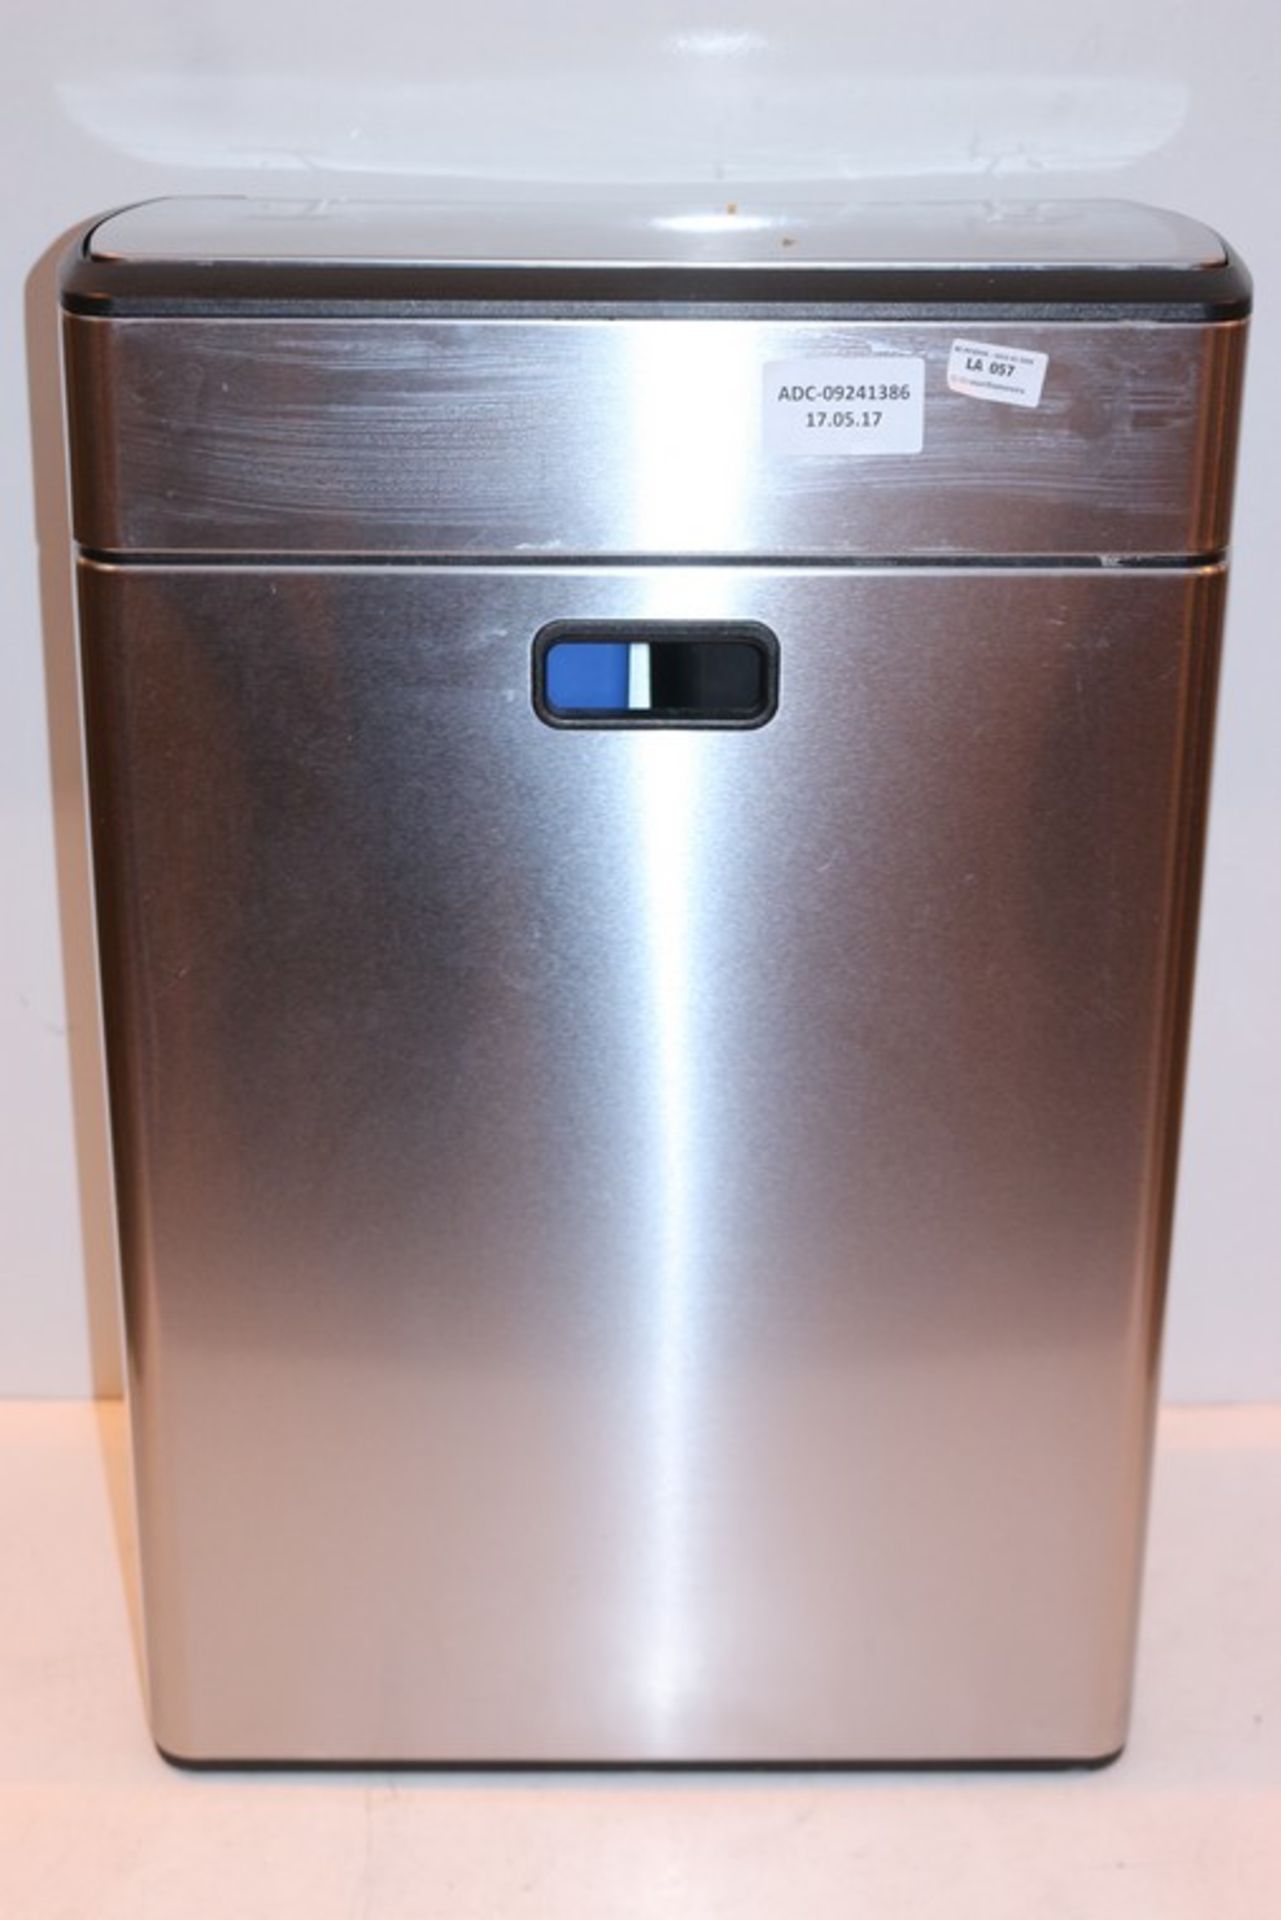 1 x SIMPLE HUMAN STAINLESS STEEL TOUCH BIN RRP £130 (17.5.17) *PLEASE NOTE THAT THE BID PRICE IS